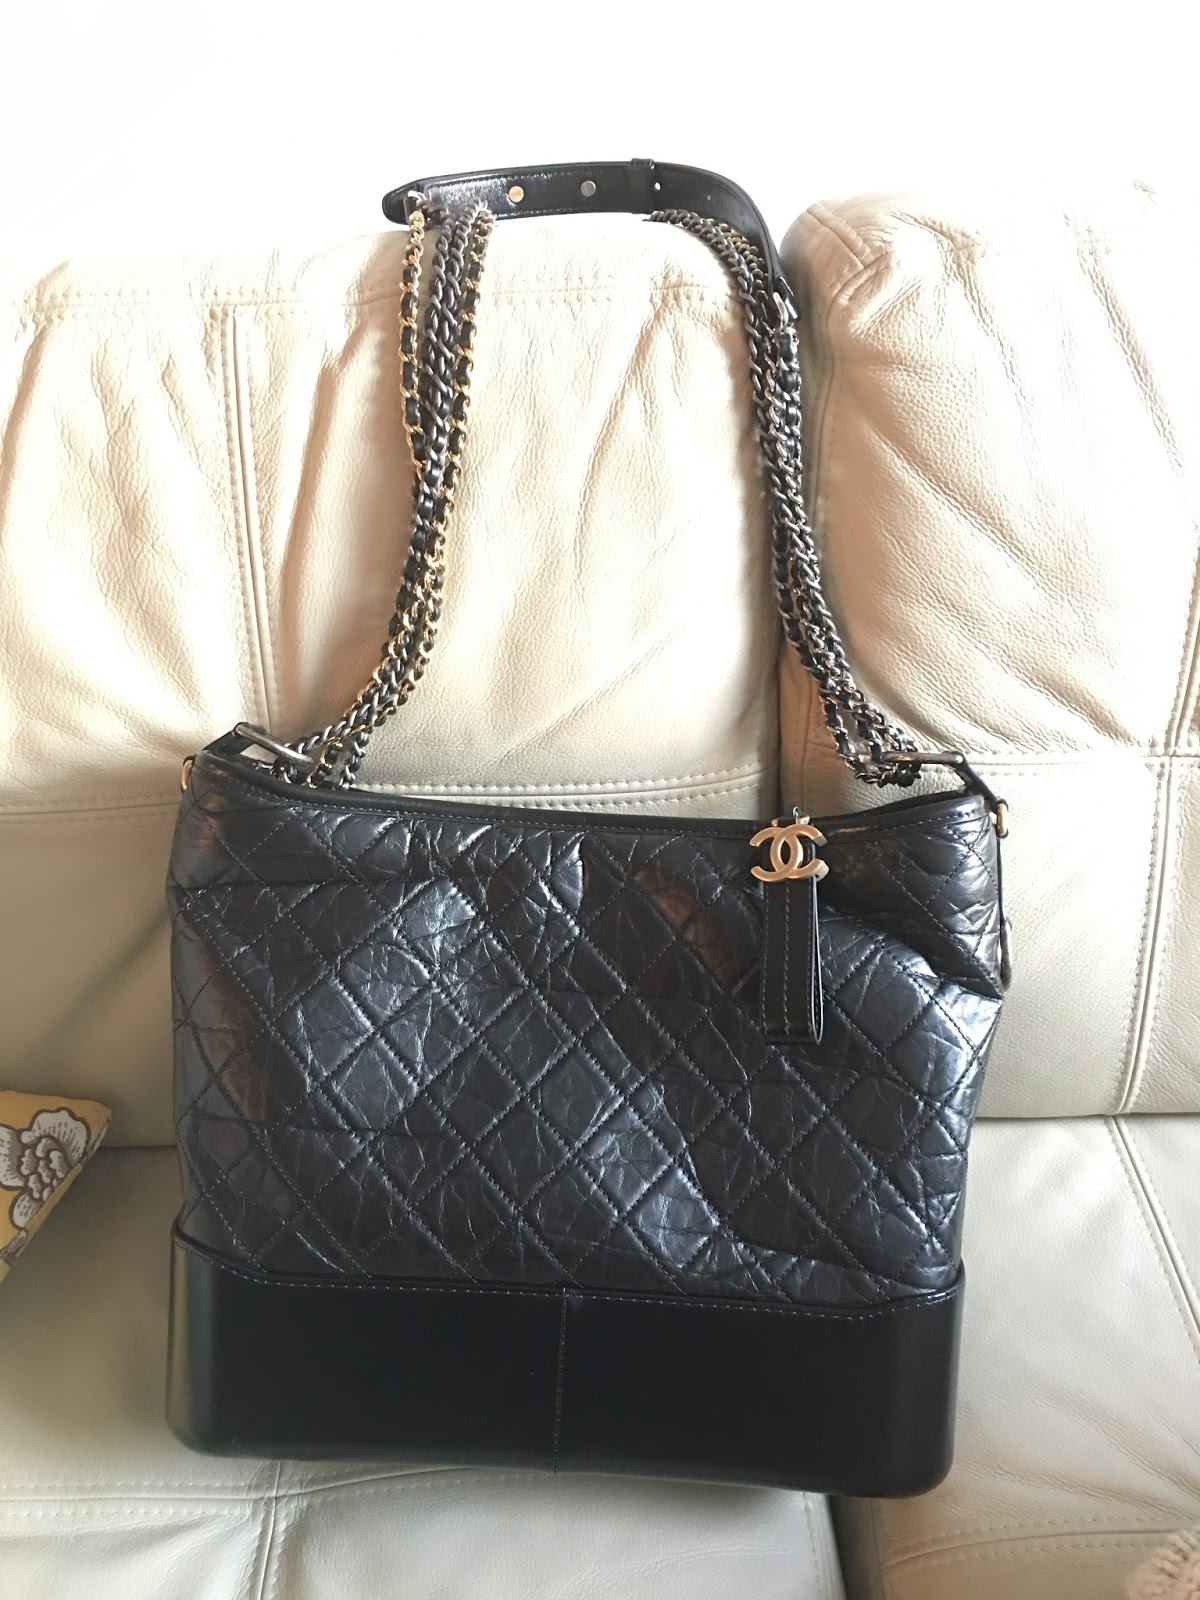 Chanel Gabrielle Small Bag Review. Wear and Tear! Will I Buy it Again?  Watch before Buying